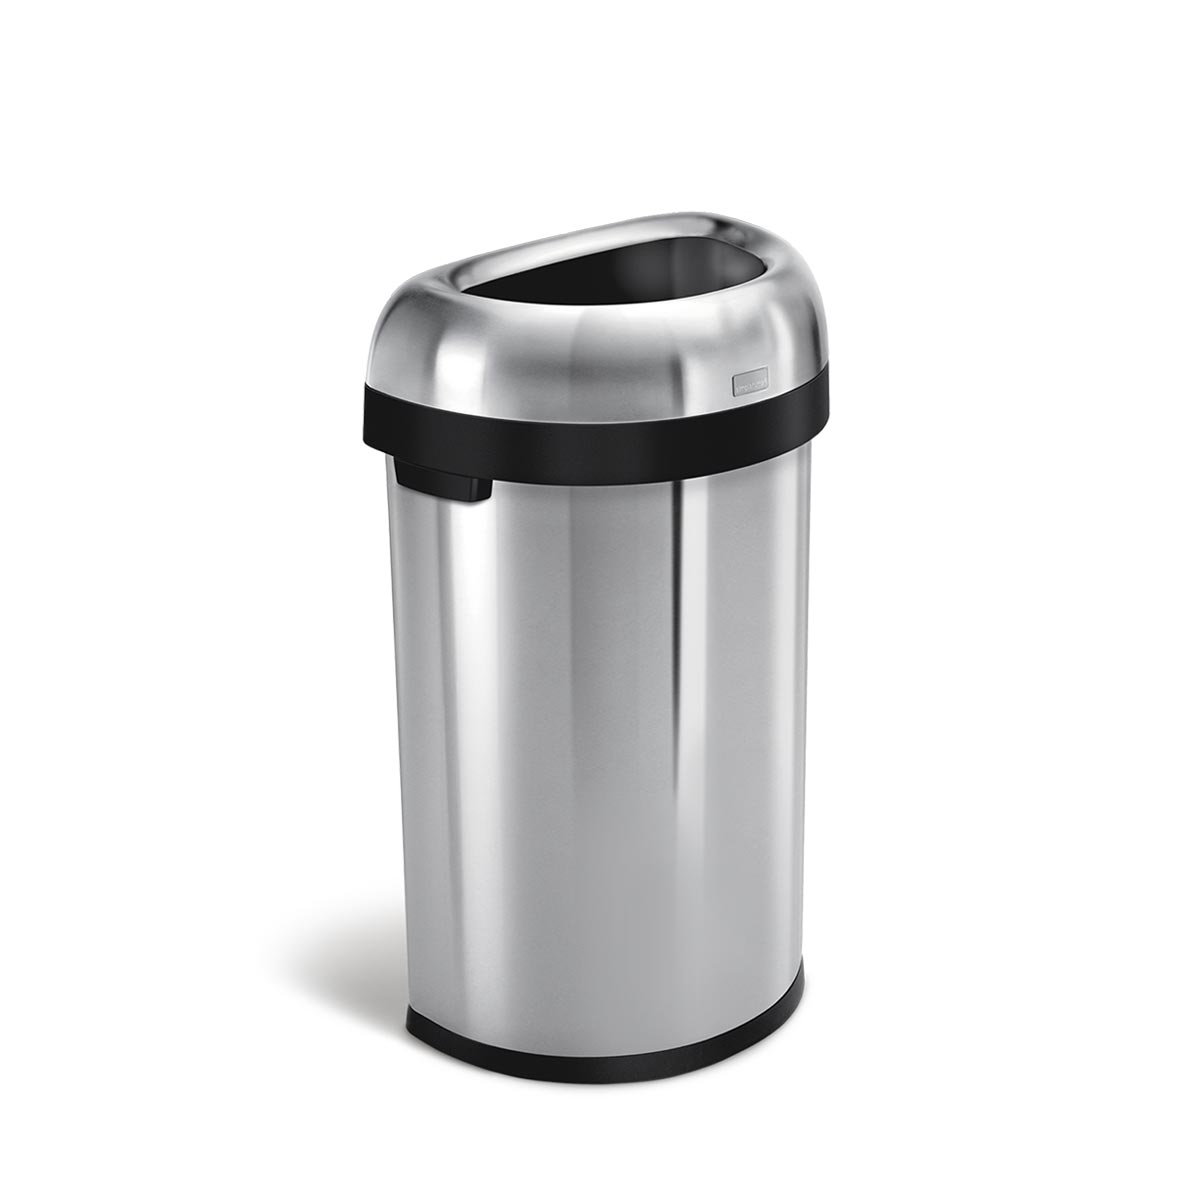 registration: trash cans - open semi-round